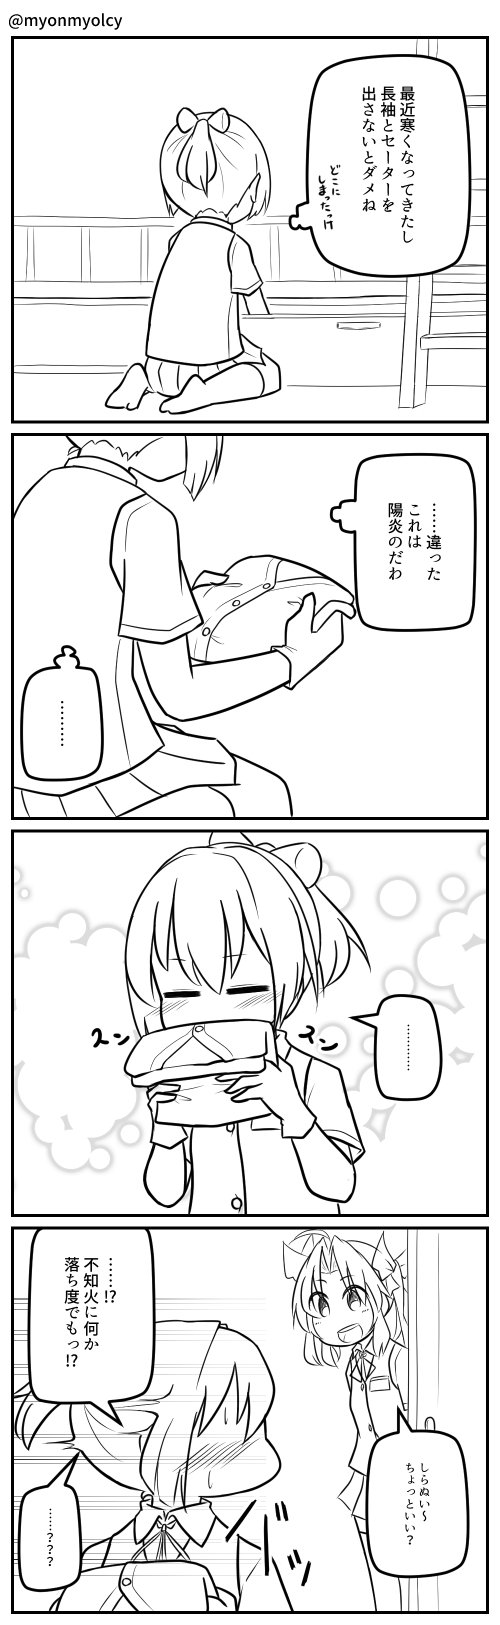 2girls 4koma blush clothes_sniffing comic commentary_request embarrassed gloves hair_ribbon highres kagerou_(kantai_collection) kantai_collection monochrome multiple_girls myonmyonlcy_(erushii) open_mouth ponytail ribbon school_uniform shiranui_(kantai_collection) smelling socks speech_bubble sweatdrop thought_bubble translation_request twitter_username vest